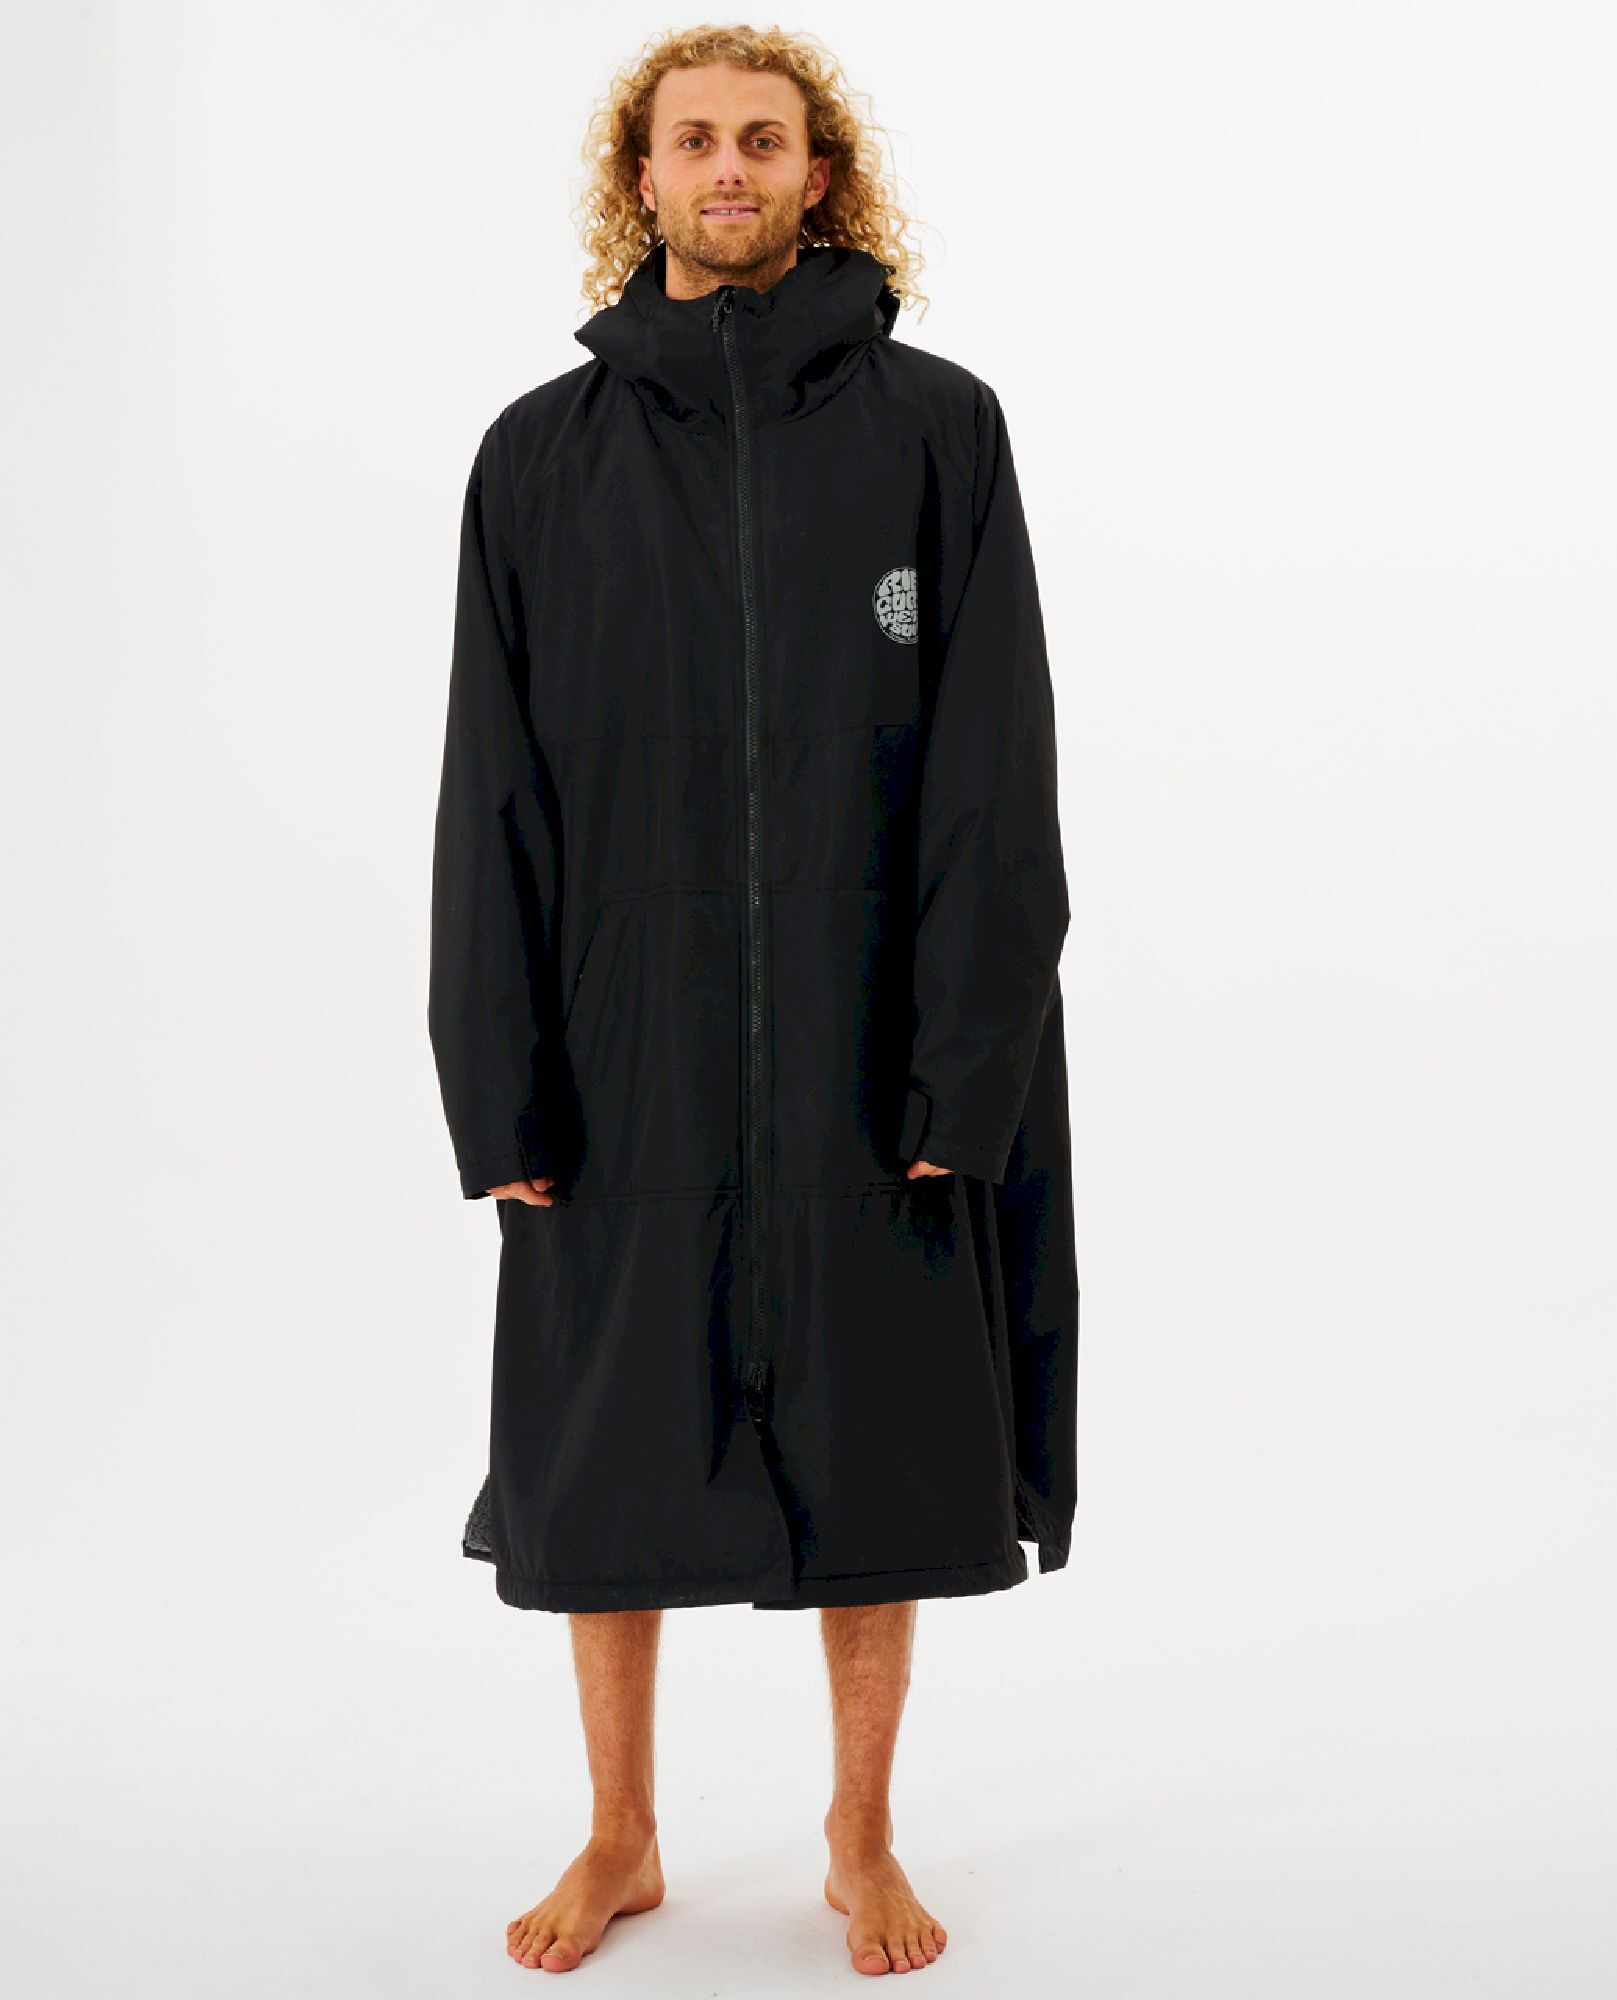 Rip Curl Surf Series Poncho - Poncho surf homme | Hardloop